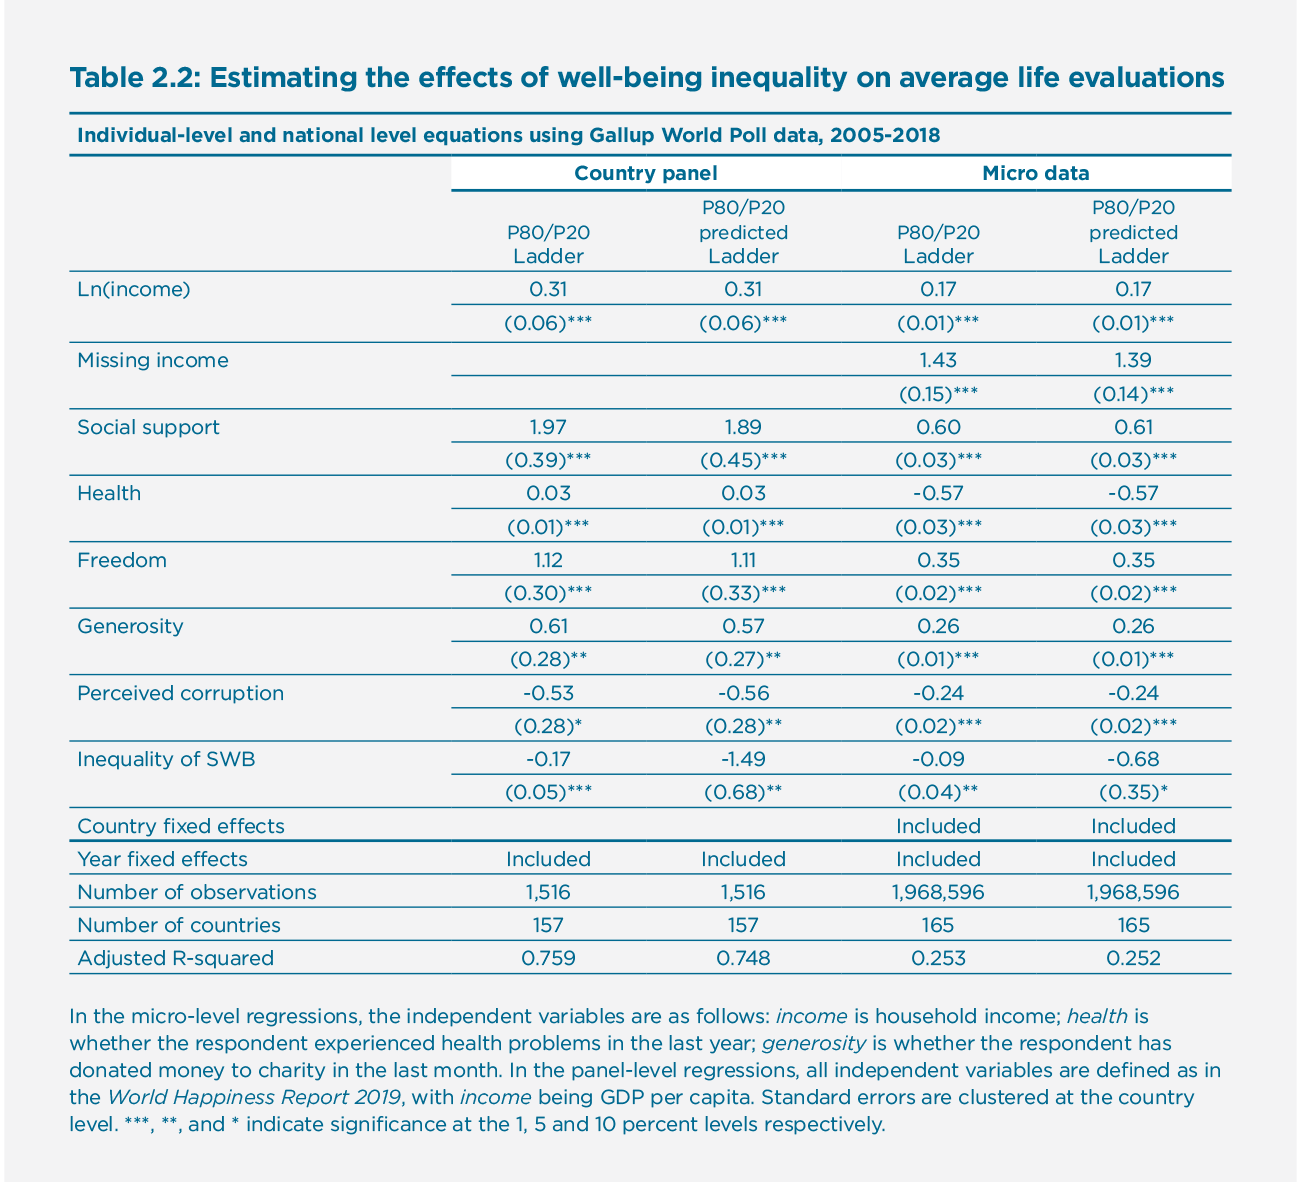 Table 2.2: Estimating the effects of well-being inequality on average life evaluations